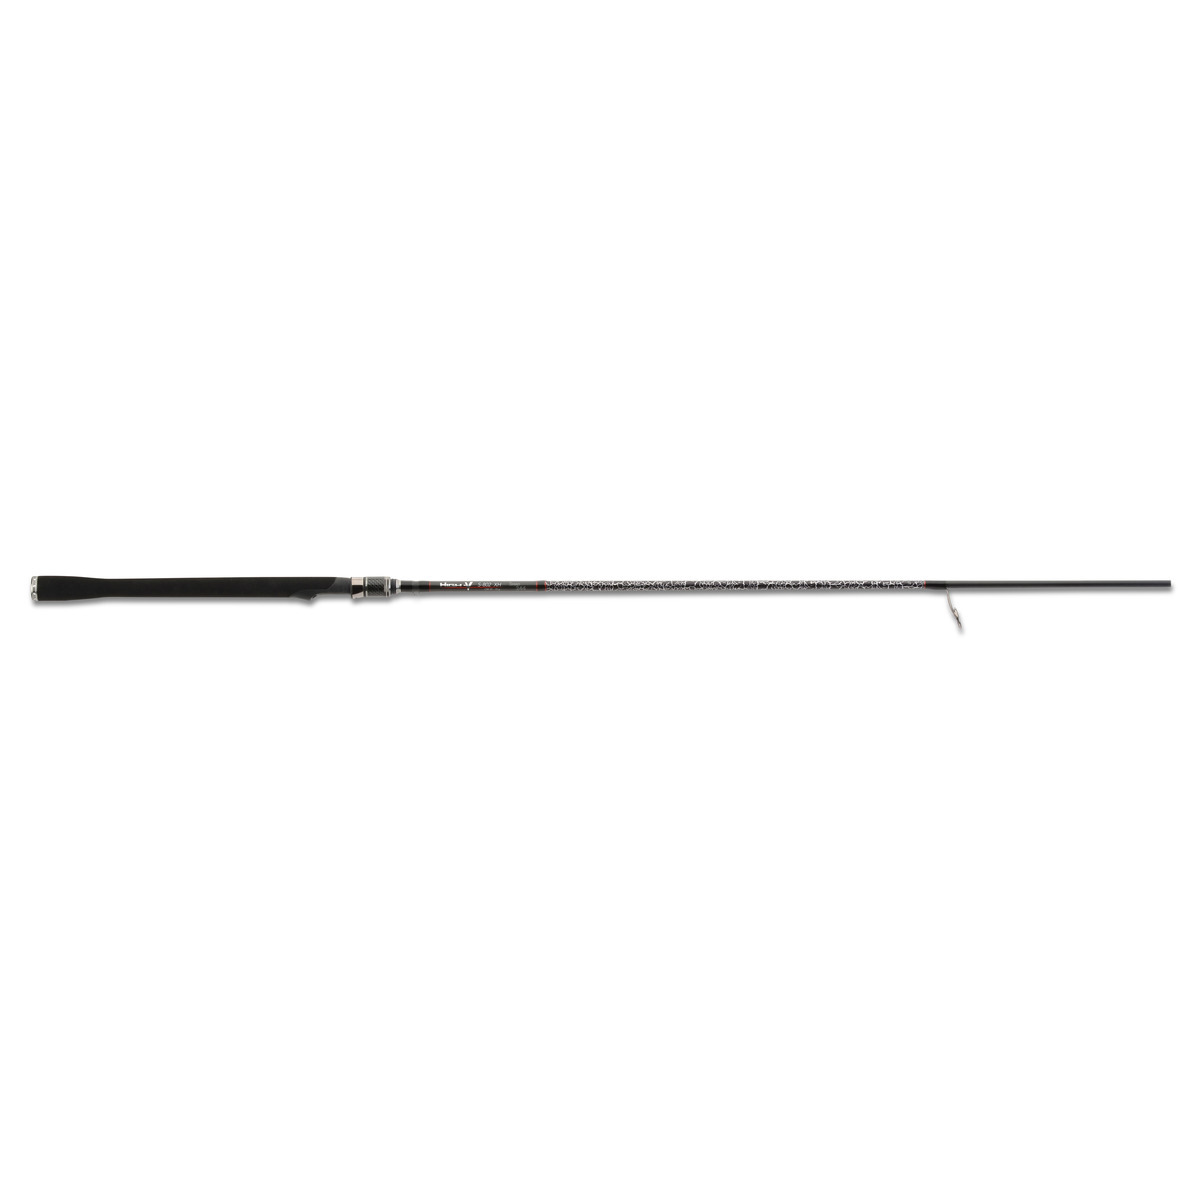 Iron Claw High-v Pike - S902XH Shad 275 25-75 g